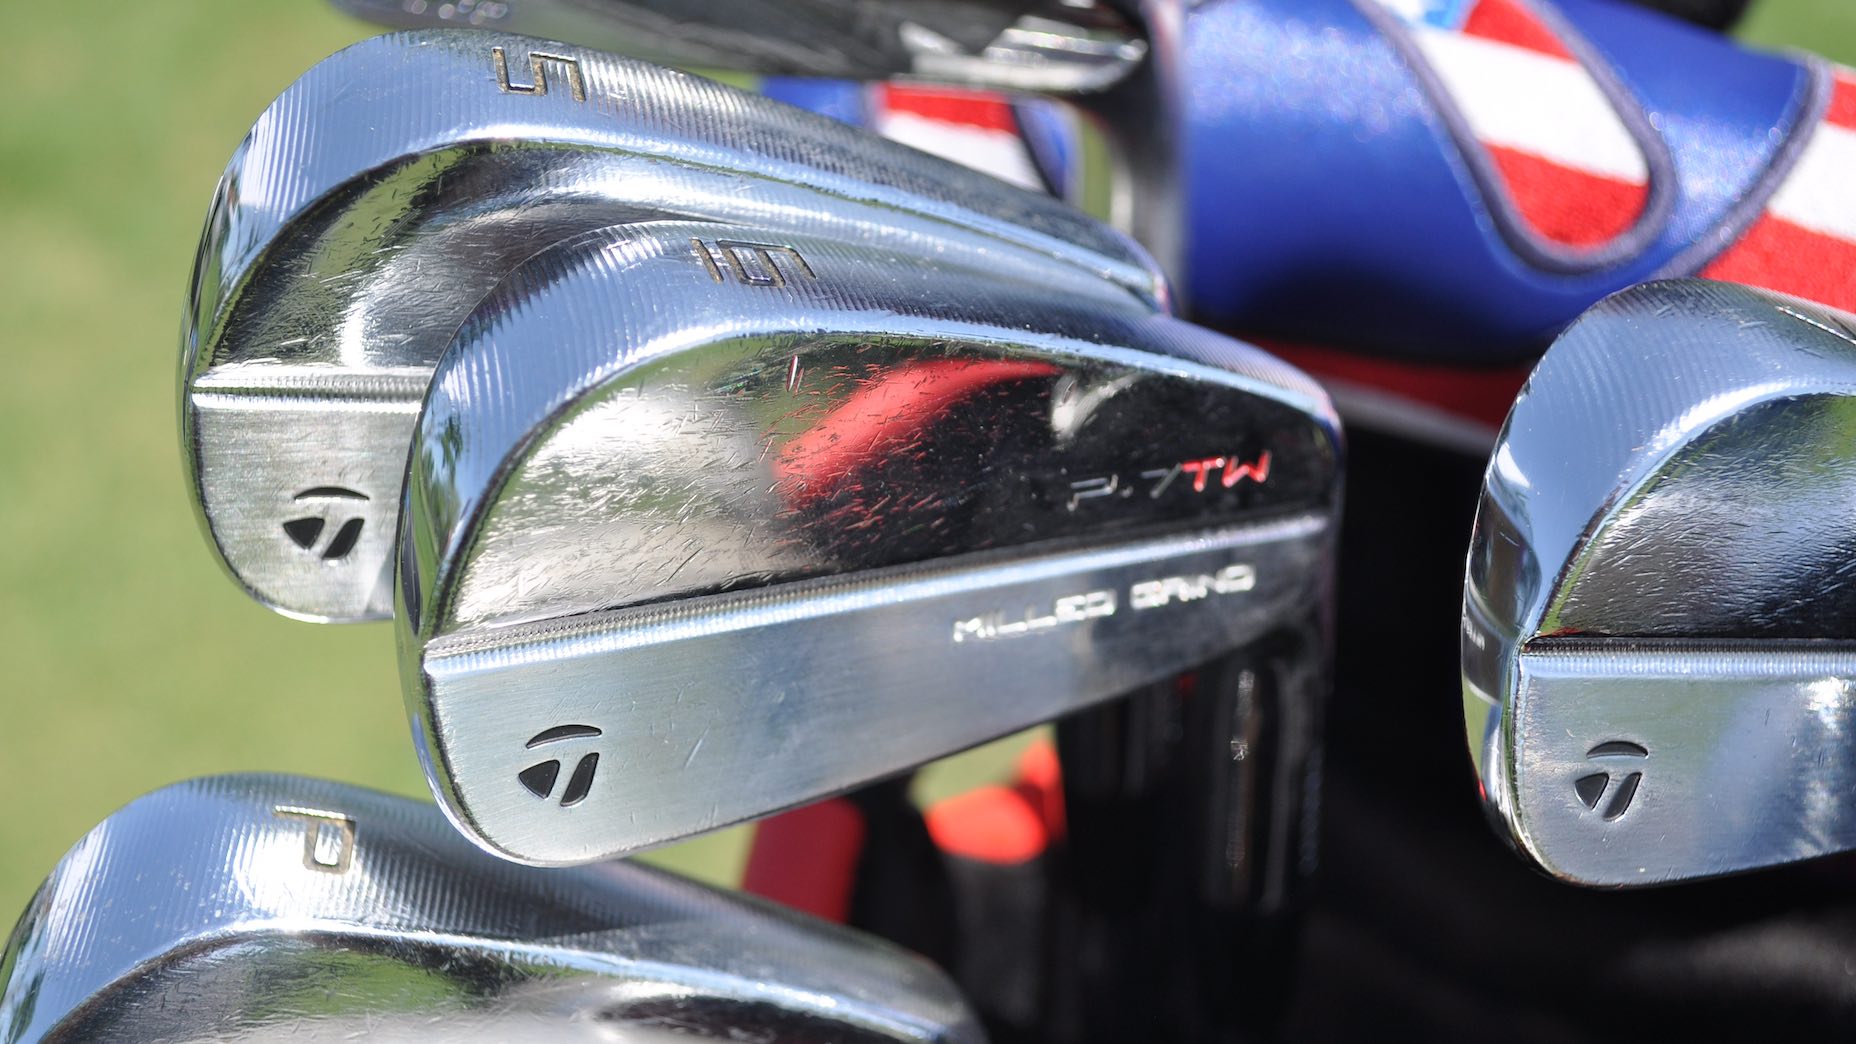 7 things I noticed while inspecting Scottie Scheffler's golf clubs